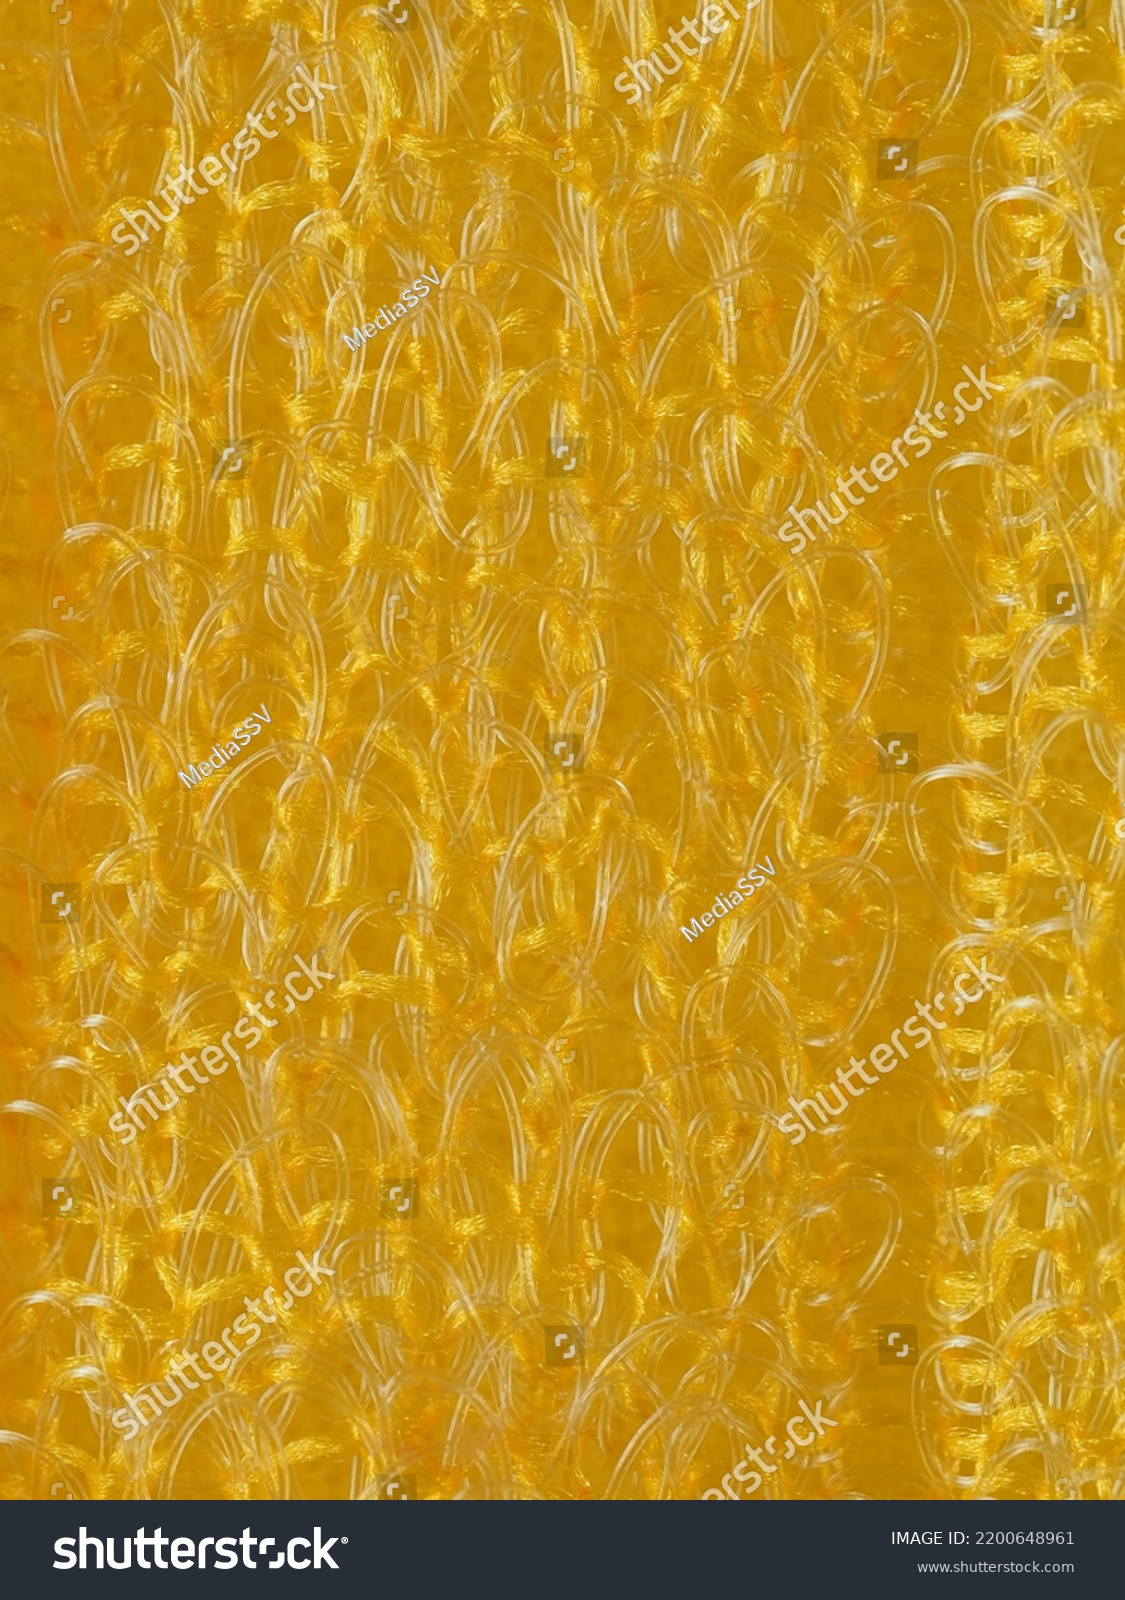 close up, background, texture, large vertical banner. heterogeneous surface structure bright saturated yellow sponge for washing dishes, kitchen, bath. full depth of field. high resolution photo #2200648961